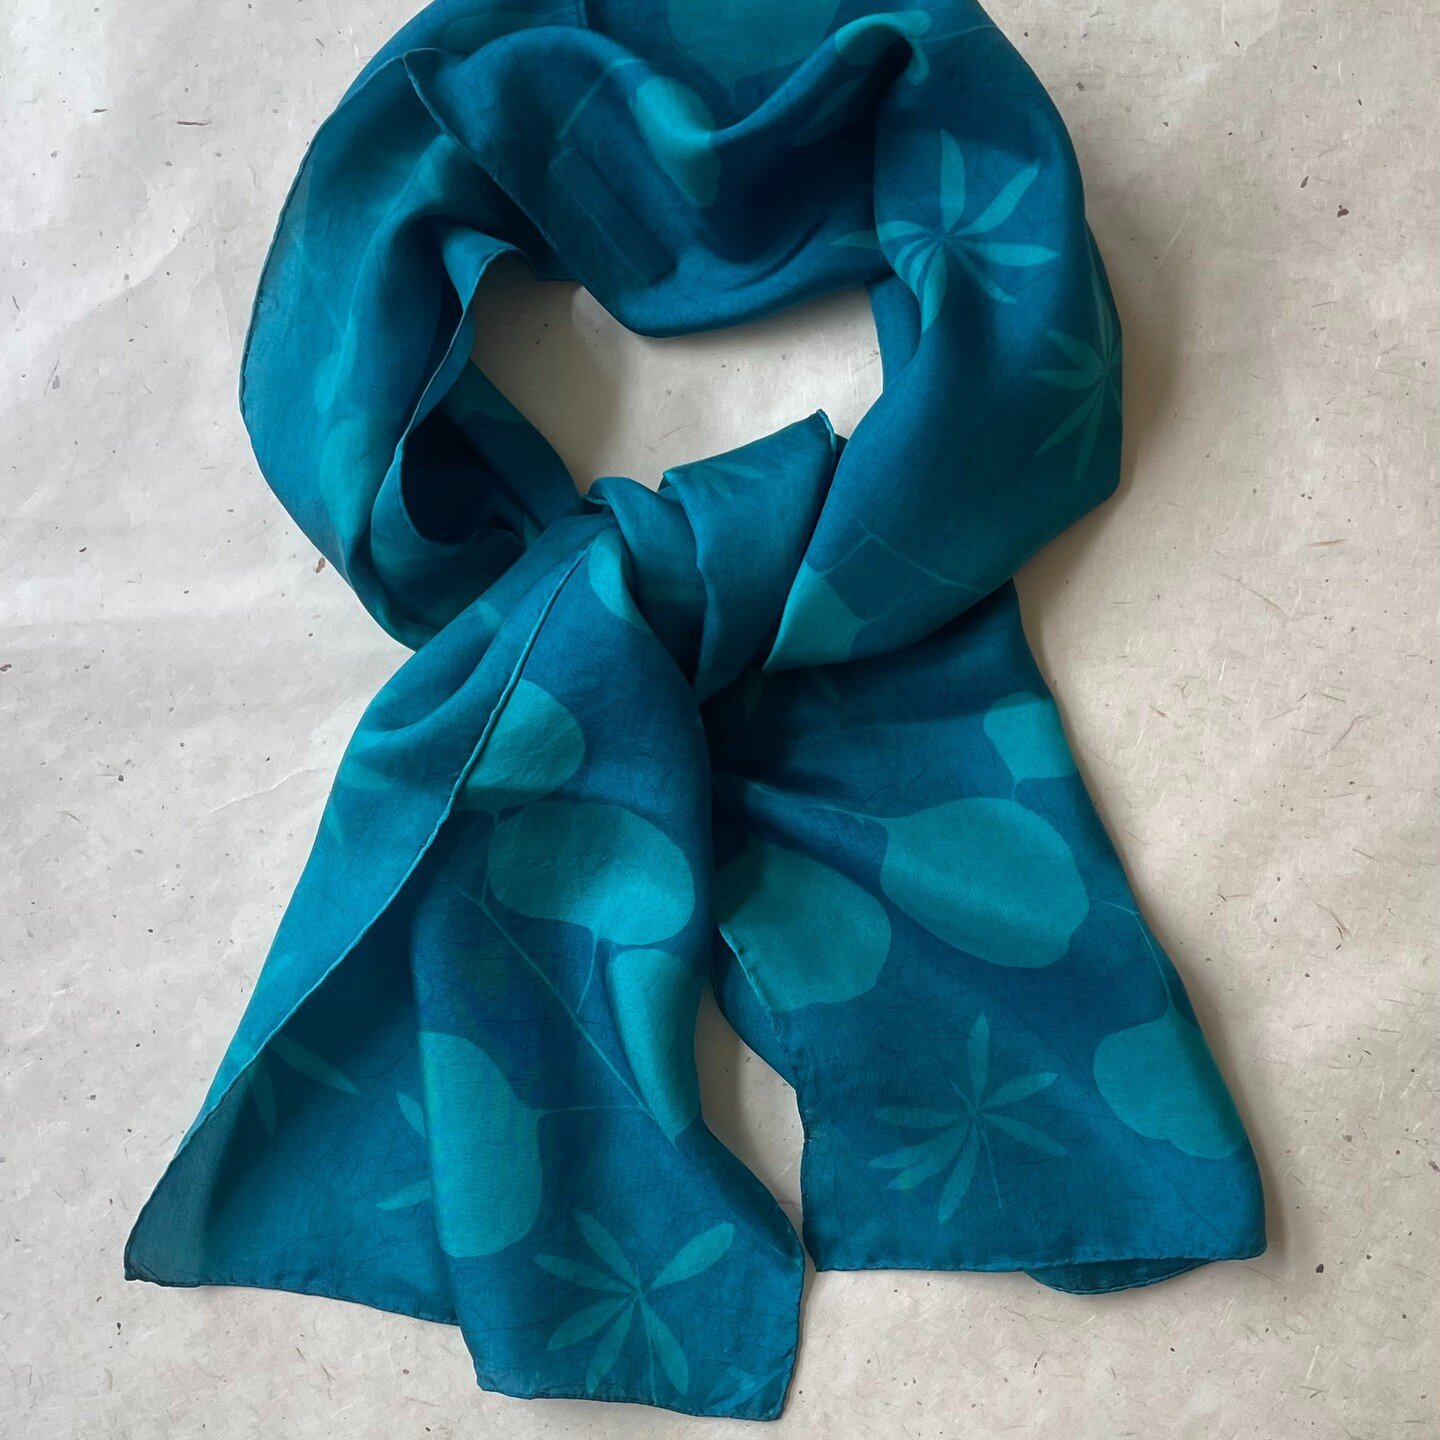 Find me @SEASONALWRAPSODY this weekend 
Nov Friday 10th - 4 pm to 8 pm Saturday 11th - 10 am to 4 pm 
The Gibson Centre, 
63 Tupper St W. Alliston 
@gibsonculturalcentre Alliston, Ontario 

New Cyanotype 100% Silk Scarf Collection!
A perfect gift for